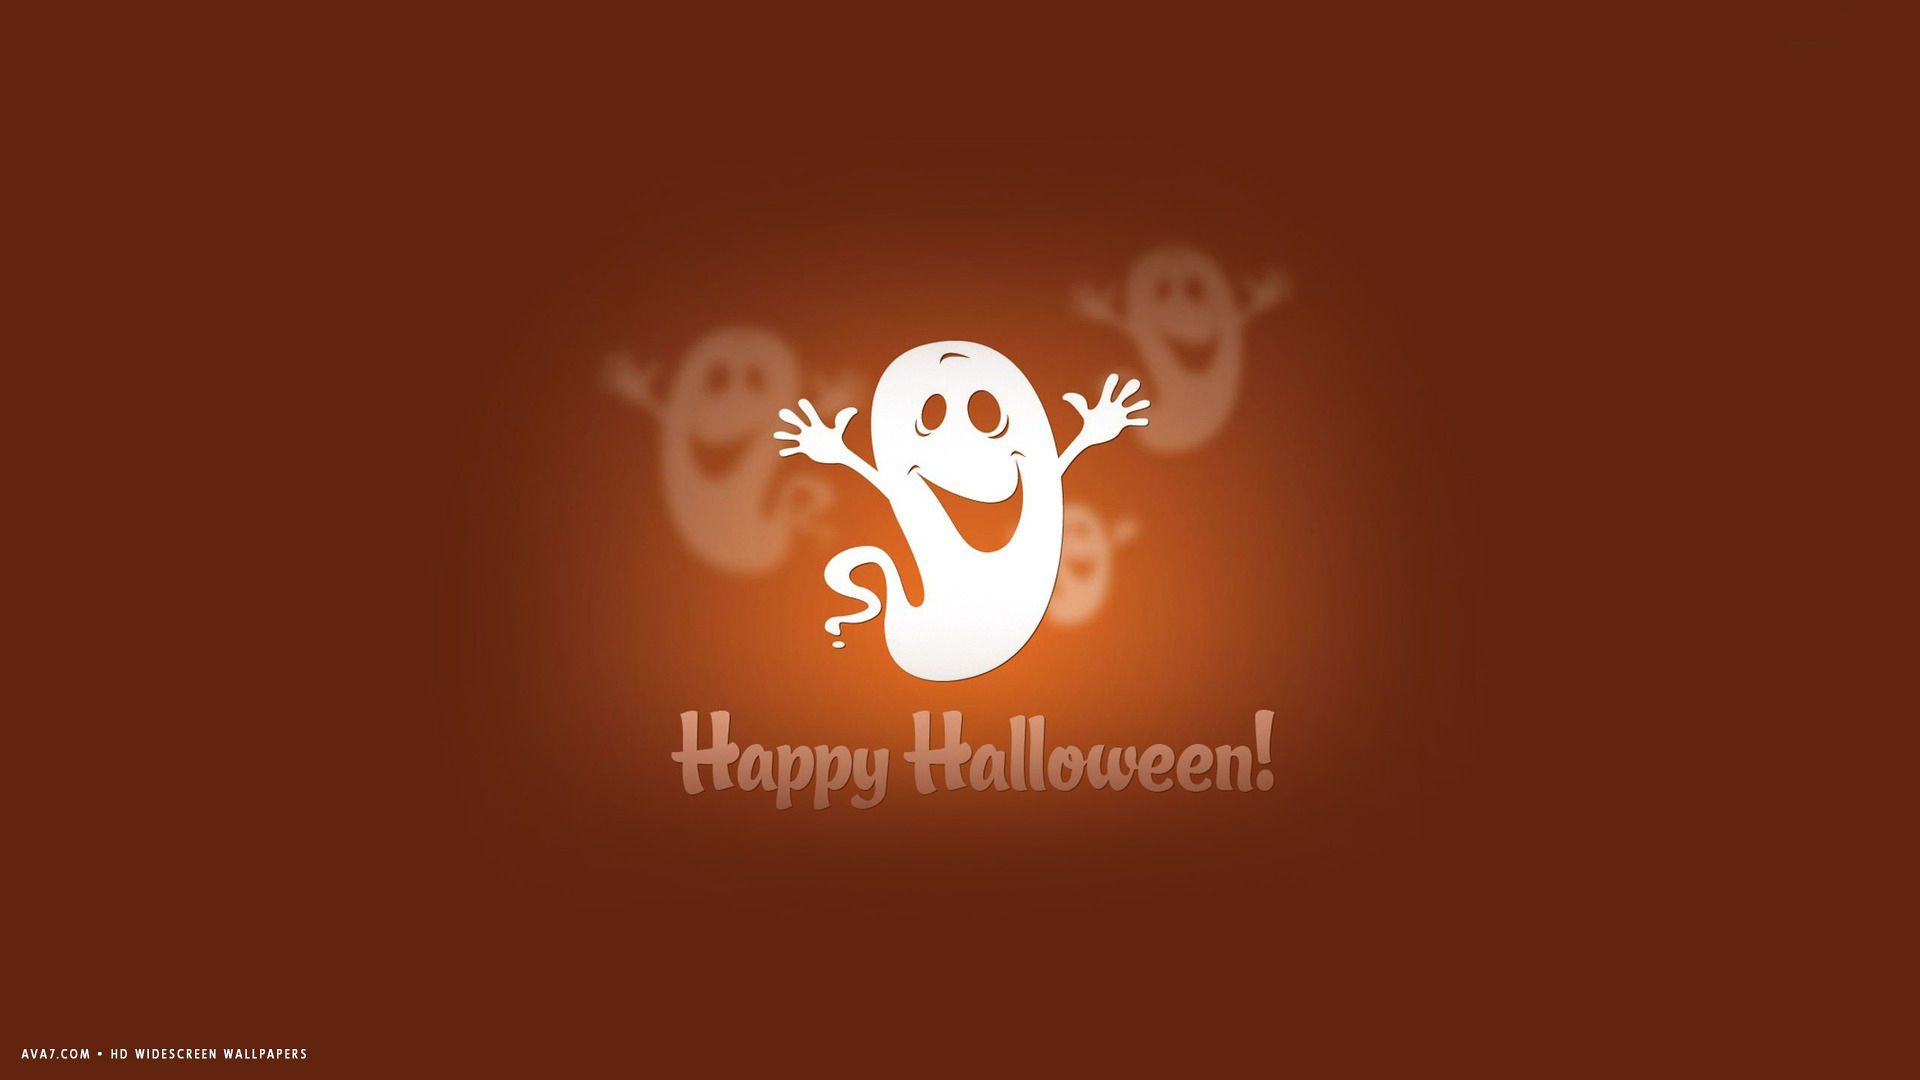 happy halloween funny ghosts simple holiday HD widescreen wallpaper / holidays background